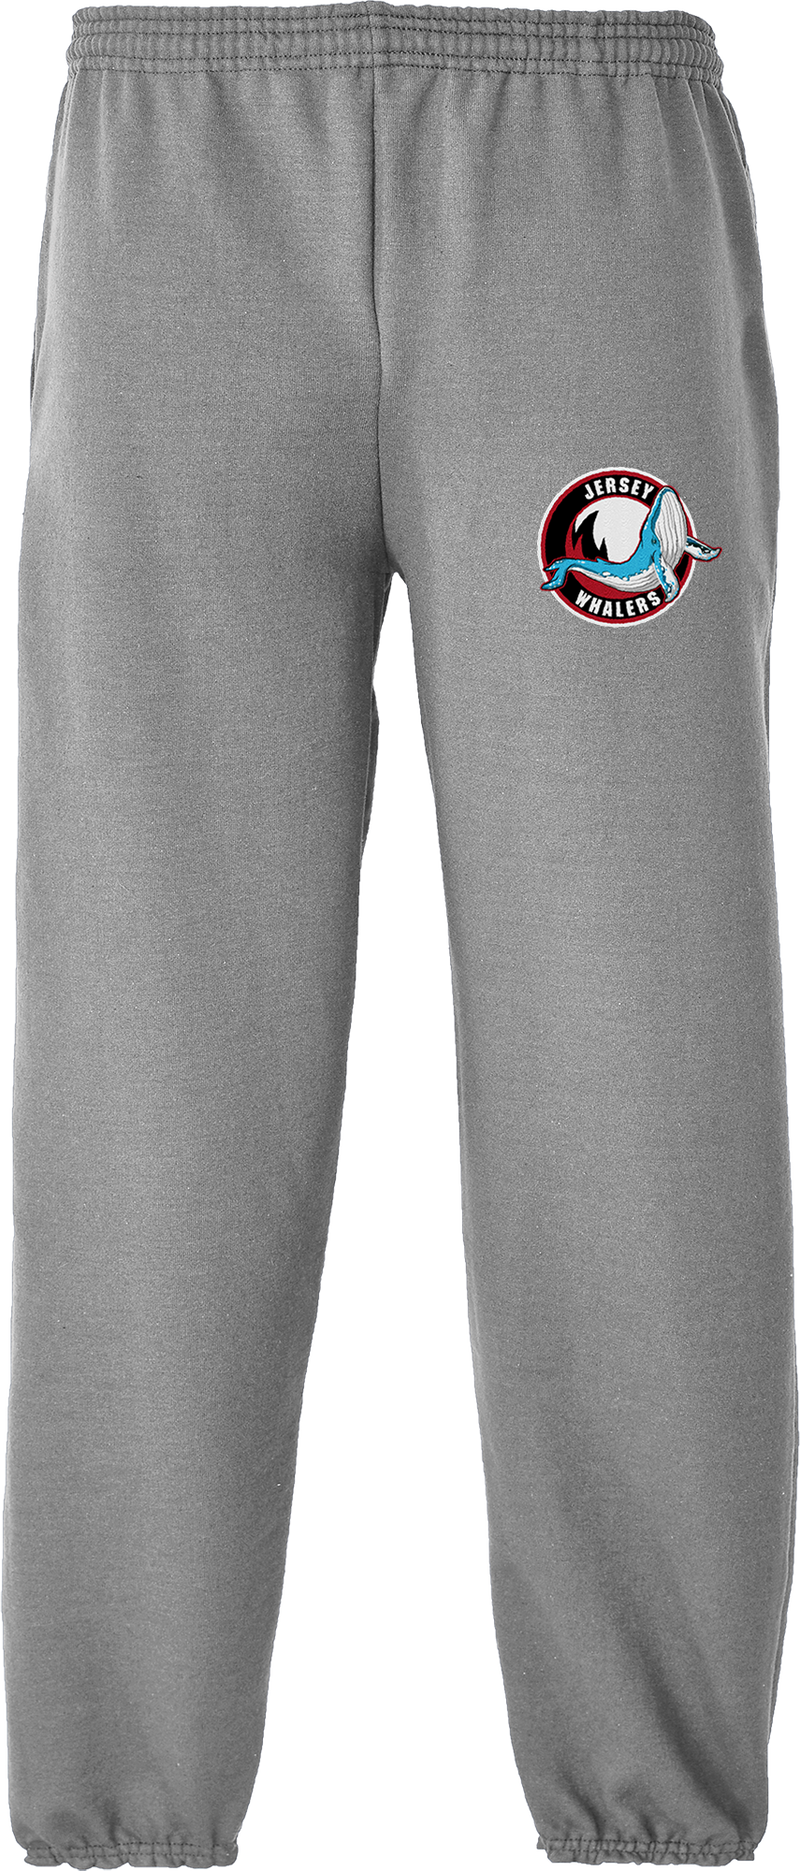 Jersey Shore Whalers Essential Fleece Sweatpant with Pockets (E1407-LL)